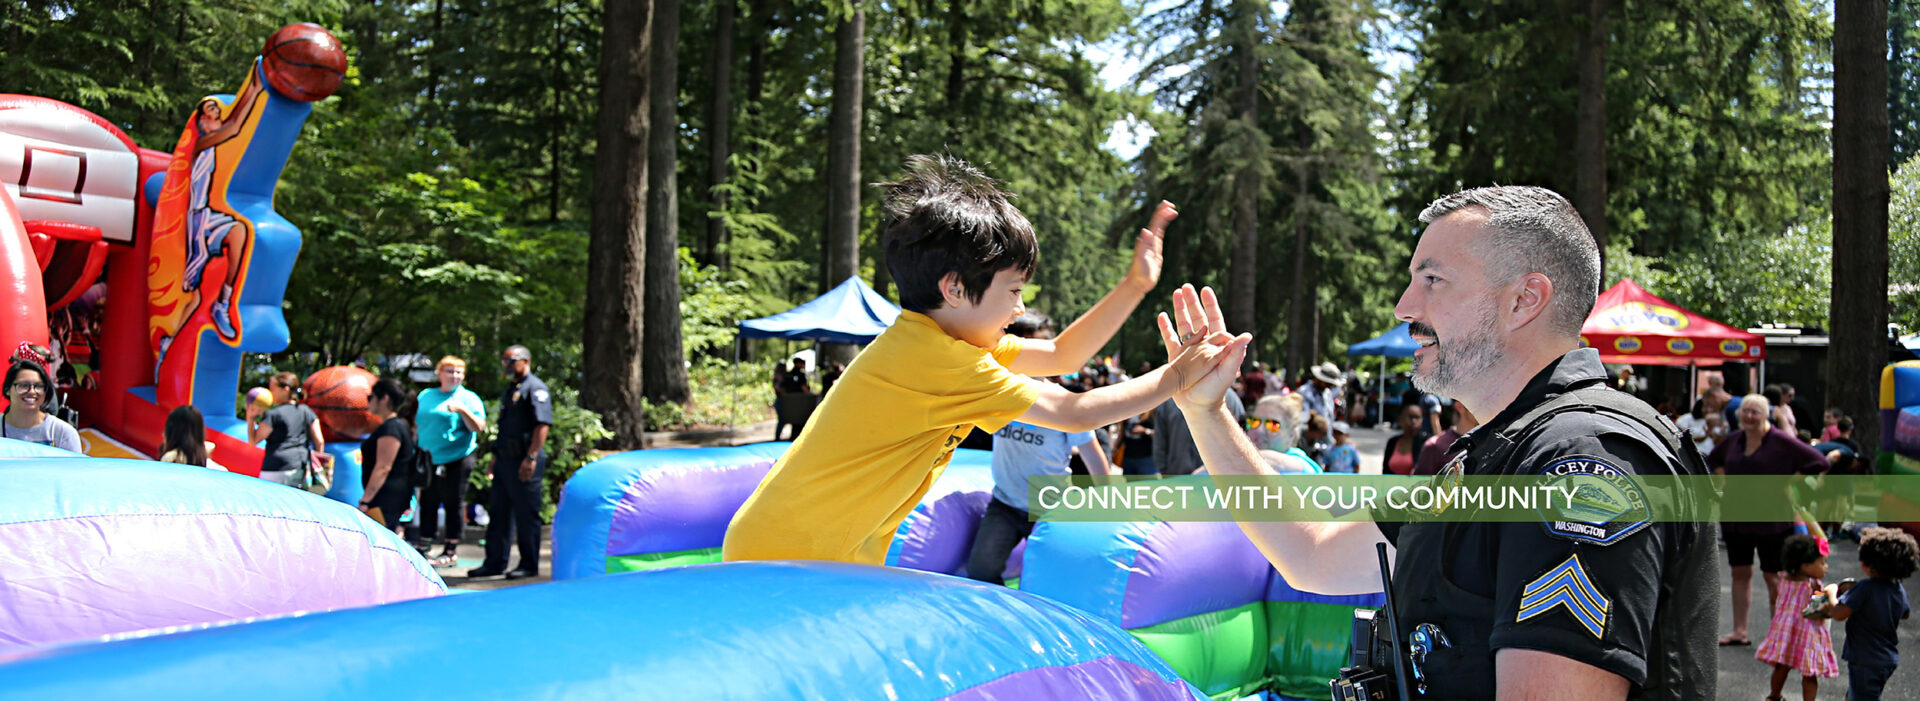 Child giving high five to police officer while jumping off of a bouncy house ride at the recent Cops for Kids event - click here to learn more about community events in Lacey